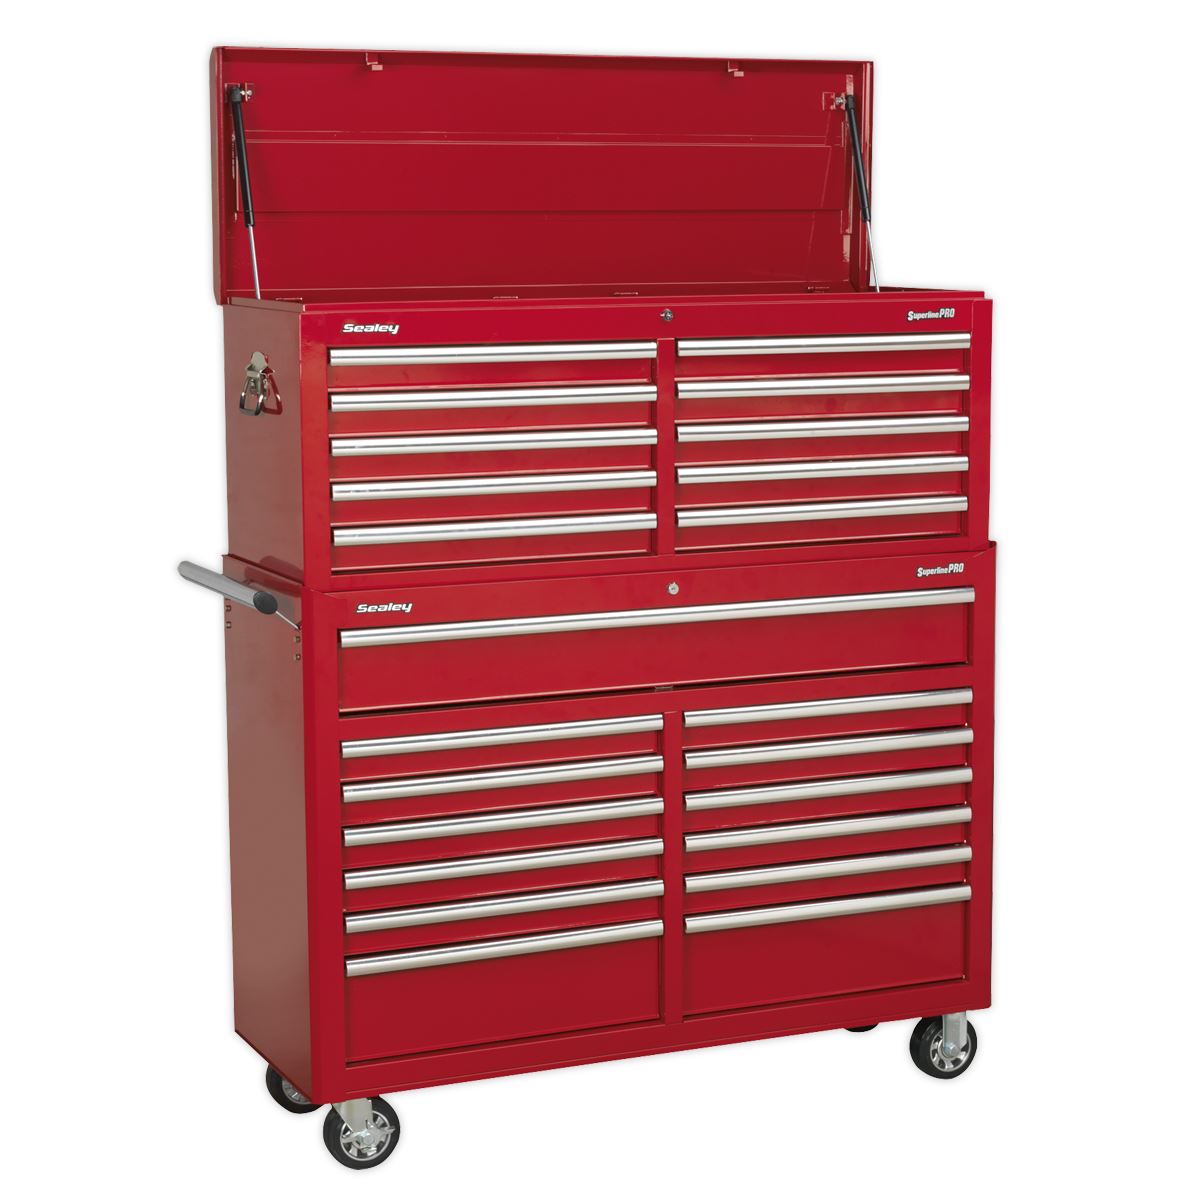 Sealey Superline Pro Tool Chest Combination 23 Drawer with Ball-Bearing Slides - Red